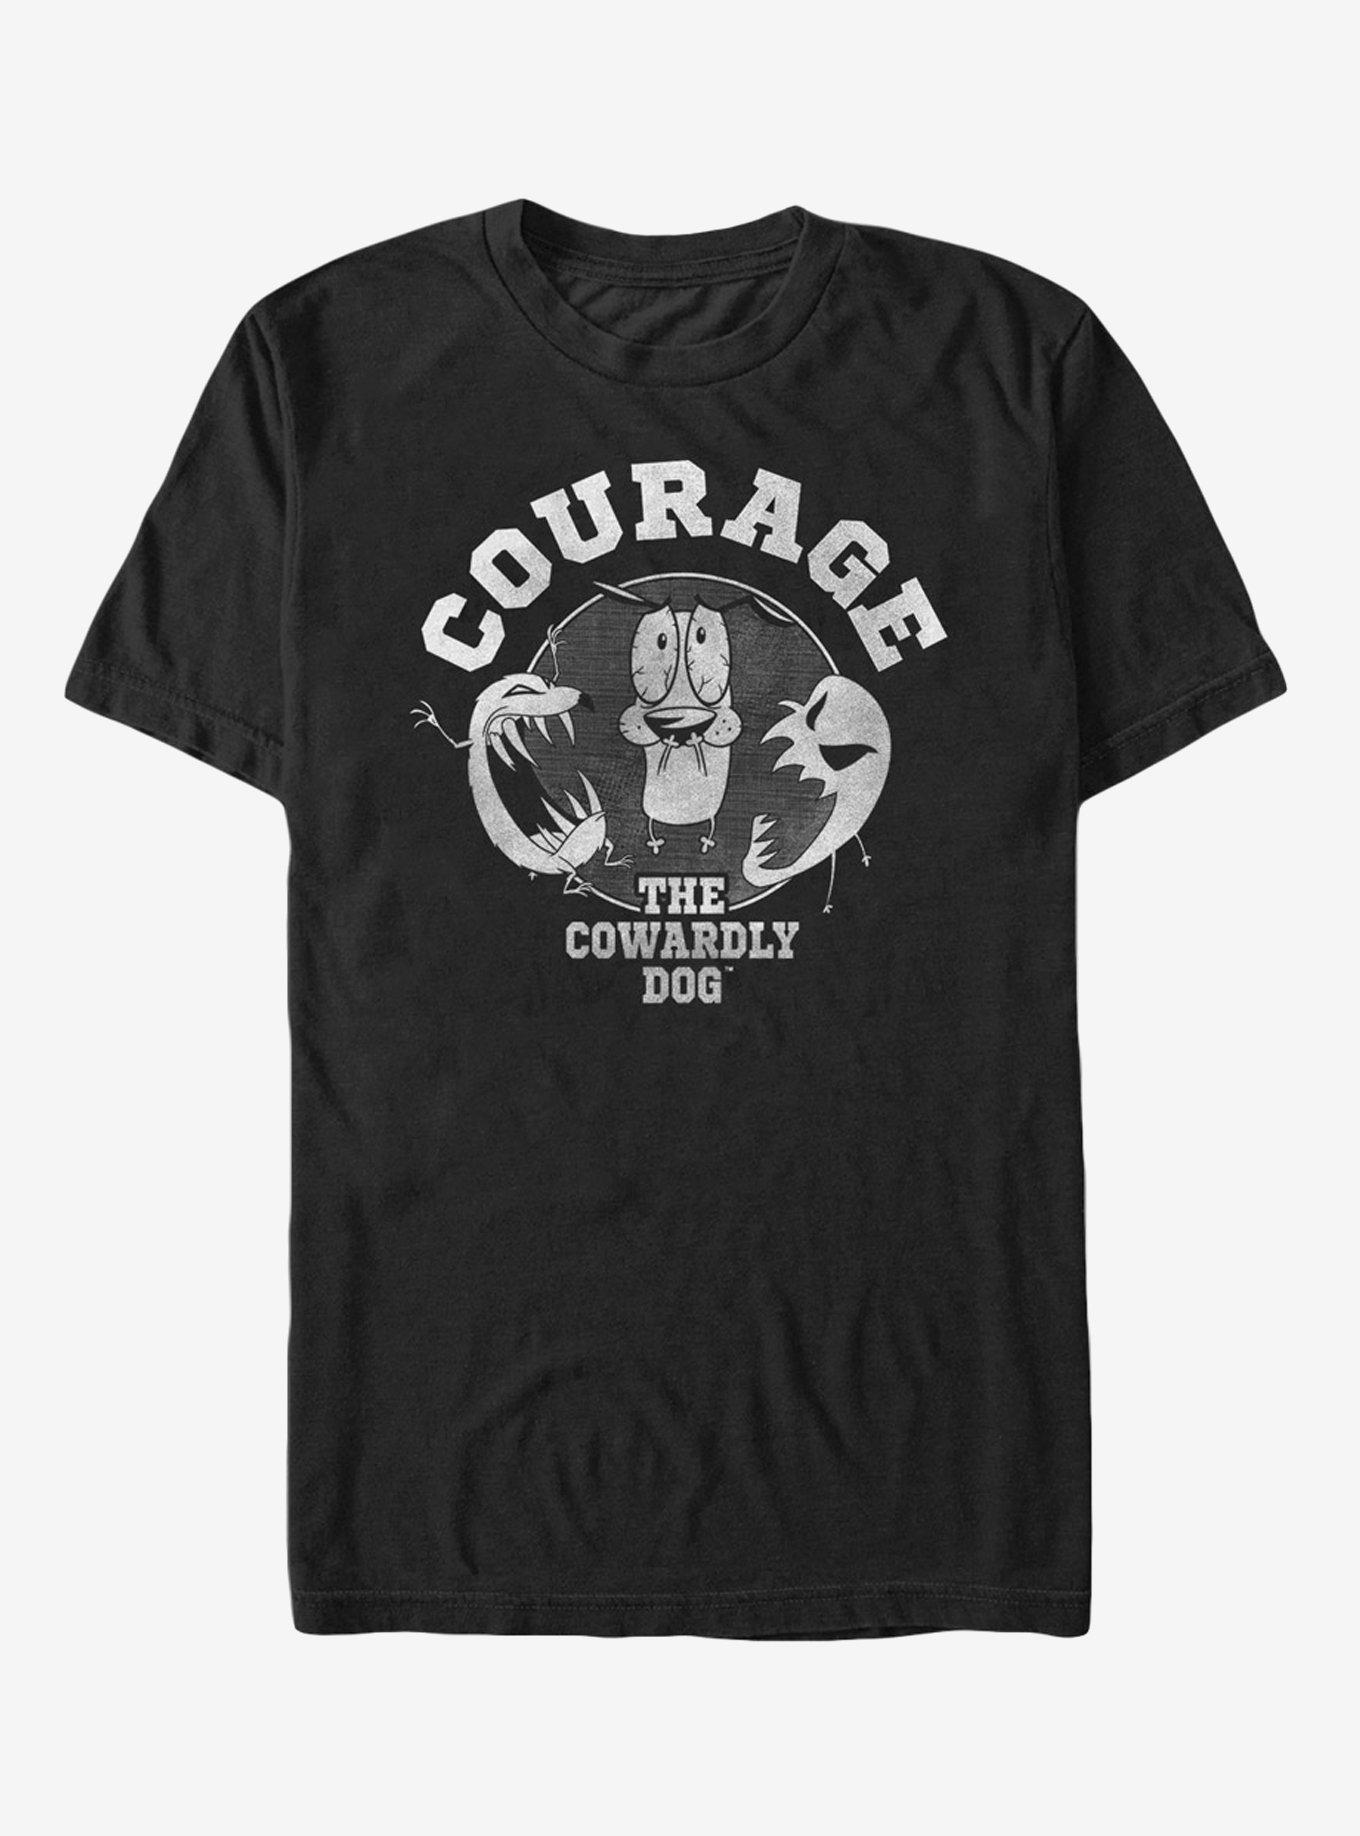 Courage The Cowardly Dog Monsters T-Shirt, BLACK, hi-res